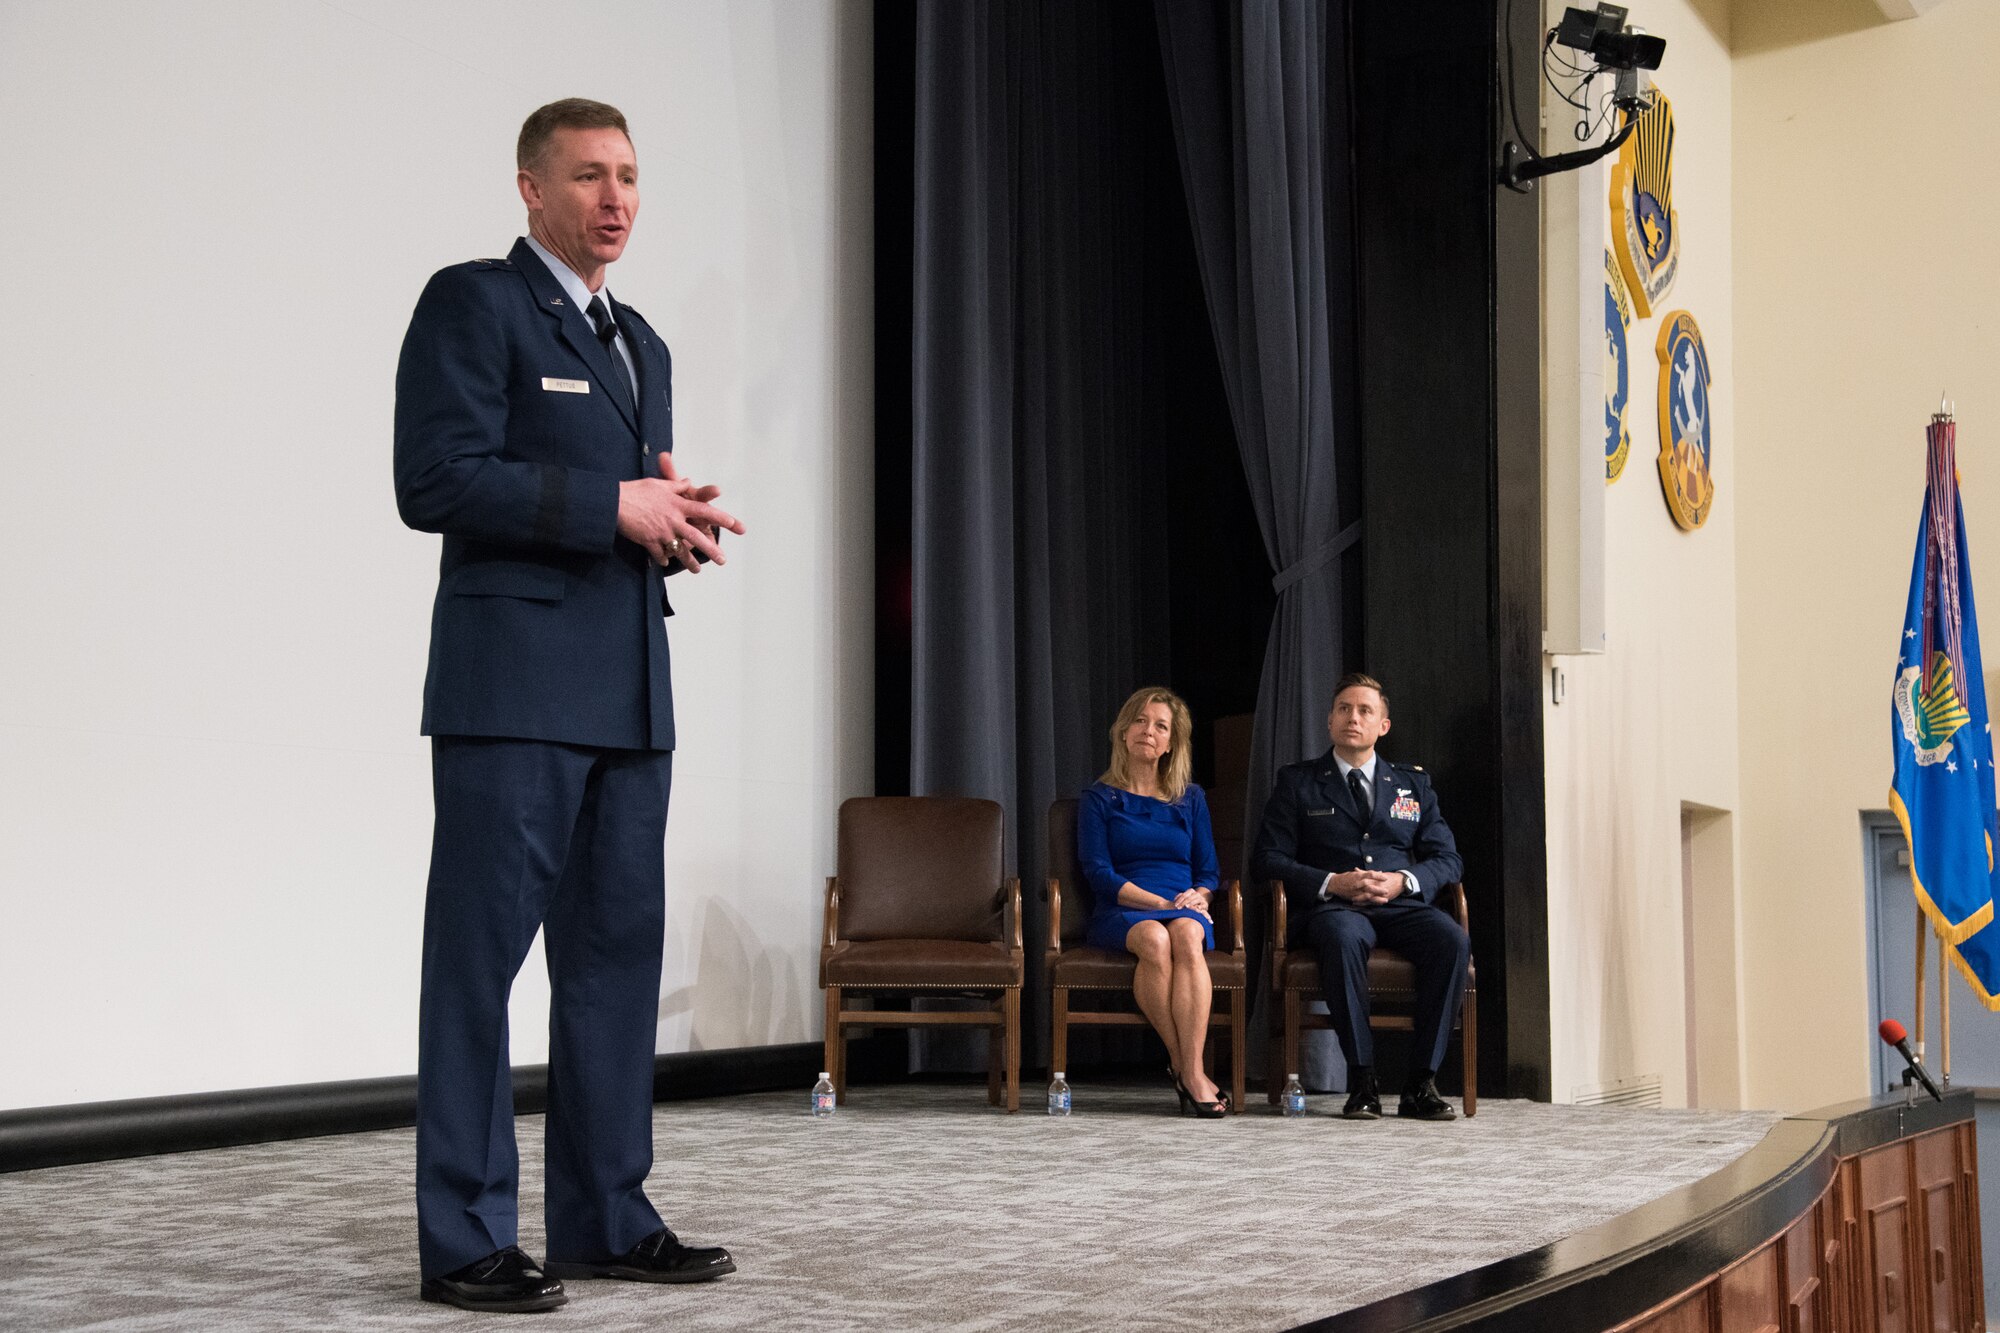 Major Jay Burrell Doerfler addressed the participants to his award ceremony at Maxwell AFB’s Wood Auditorium, November 18, 2019. Doerfler provided 125 hours of counseling for a local youth group made up of more than 50 teams, volunteered his time towards local charities and homeless shelters, thousands of meals were packed for and served for malnourished children of homelessness throughout the year, all while executing 5,700 sorties and more than 9,300 flying hours.